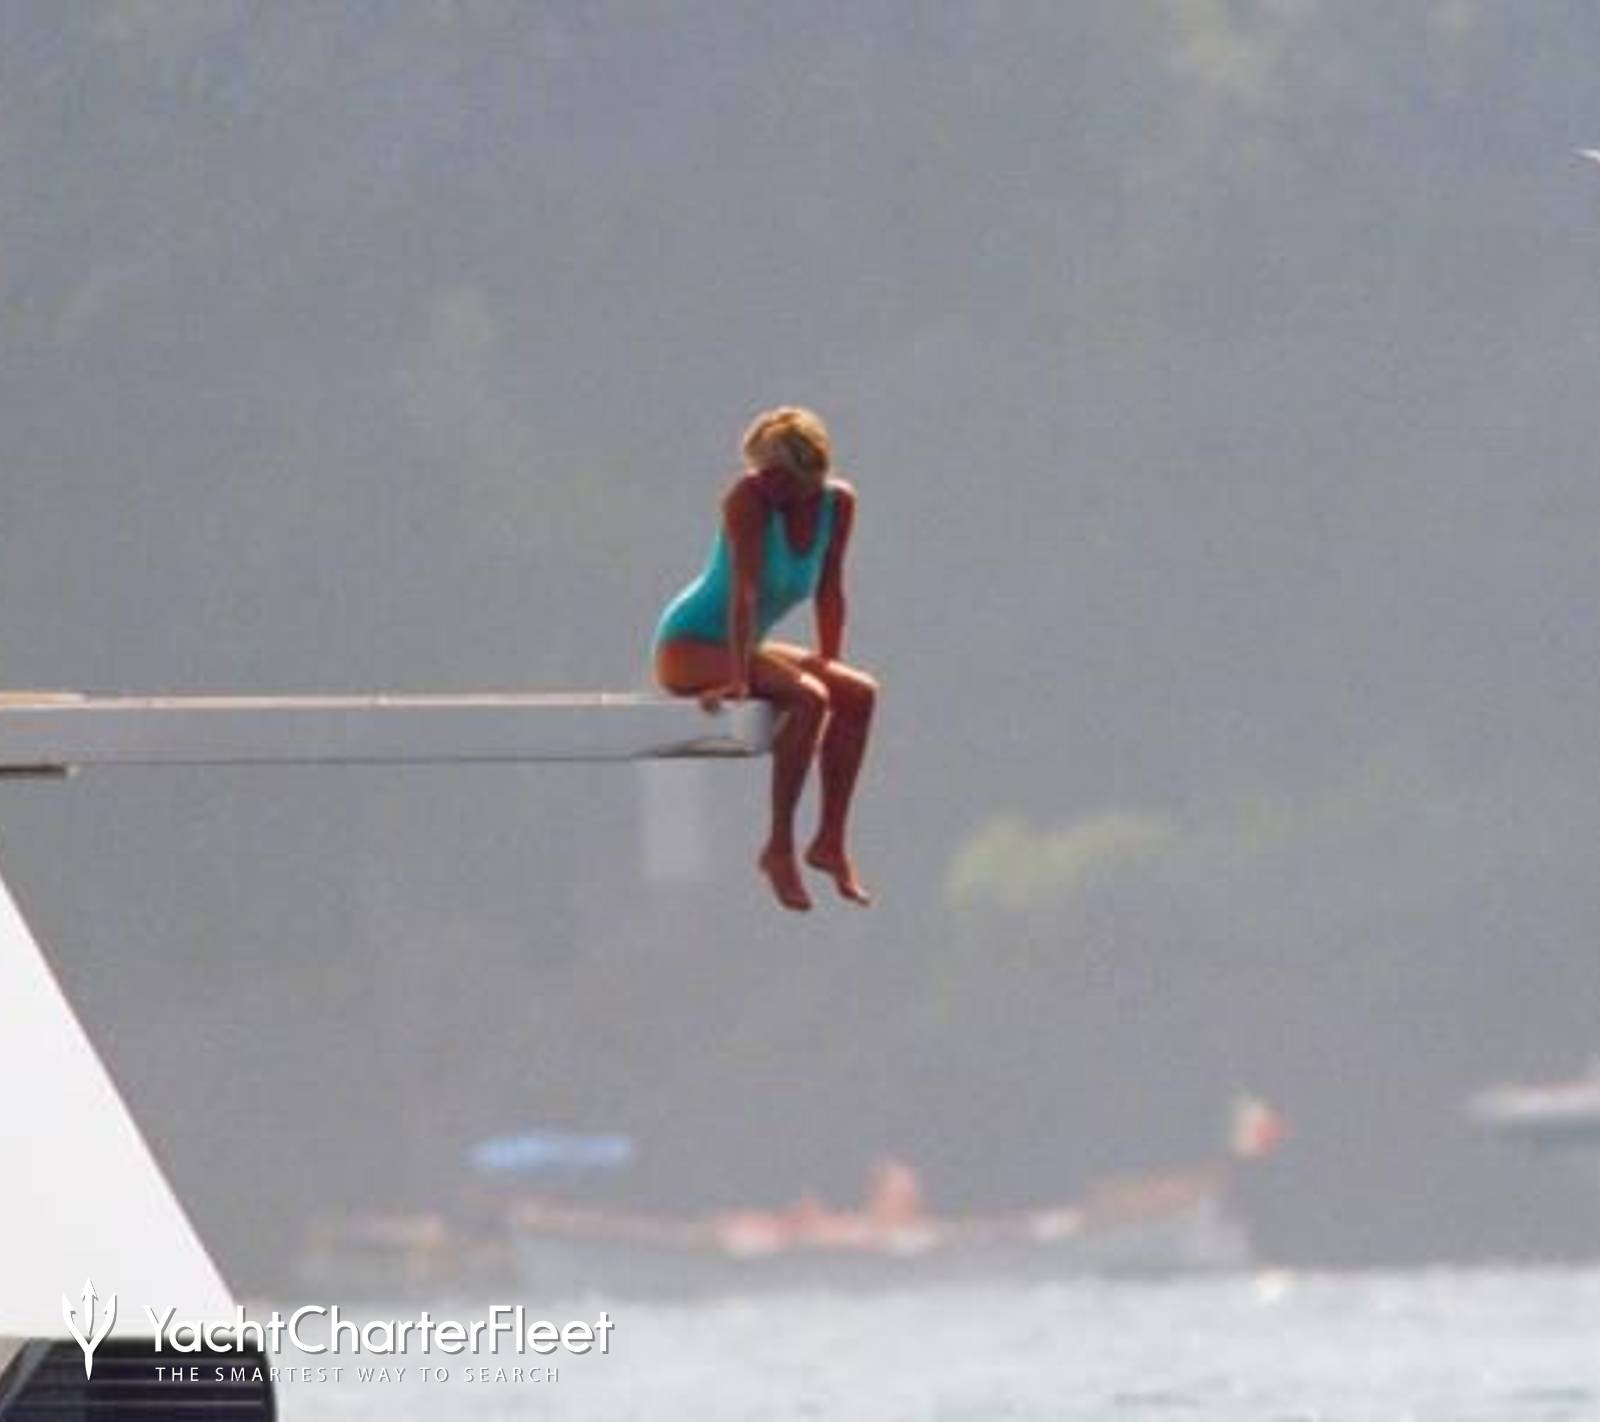 diana on yacht diving board